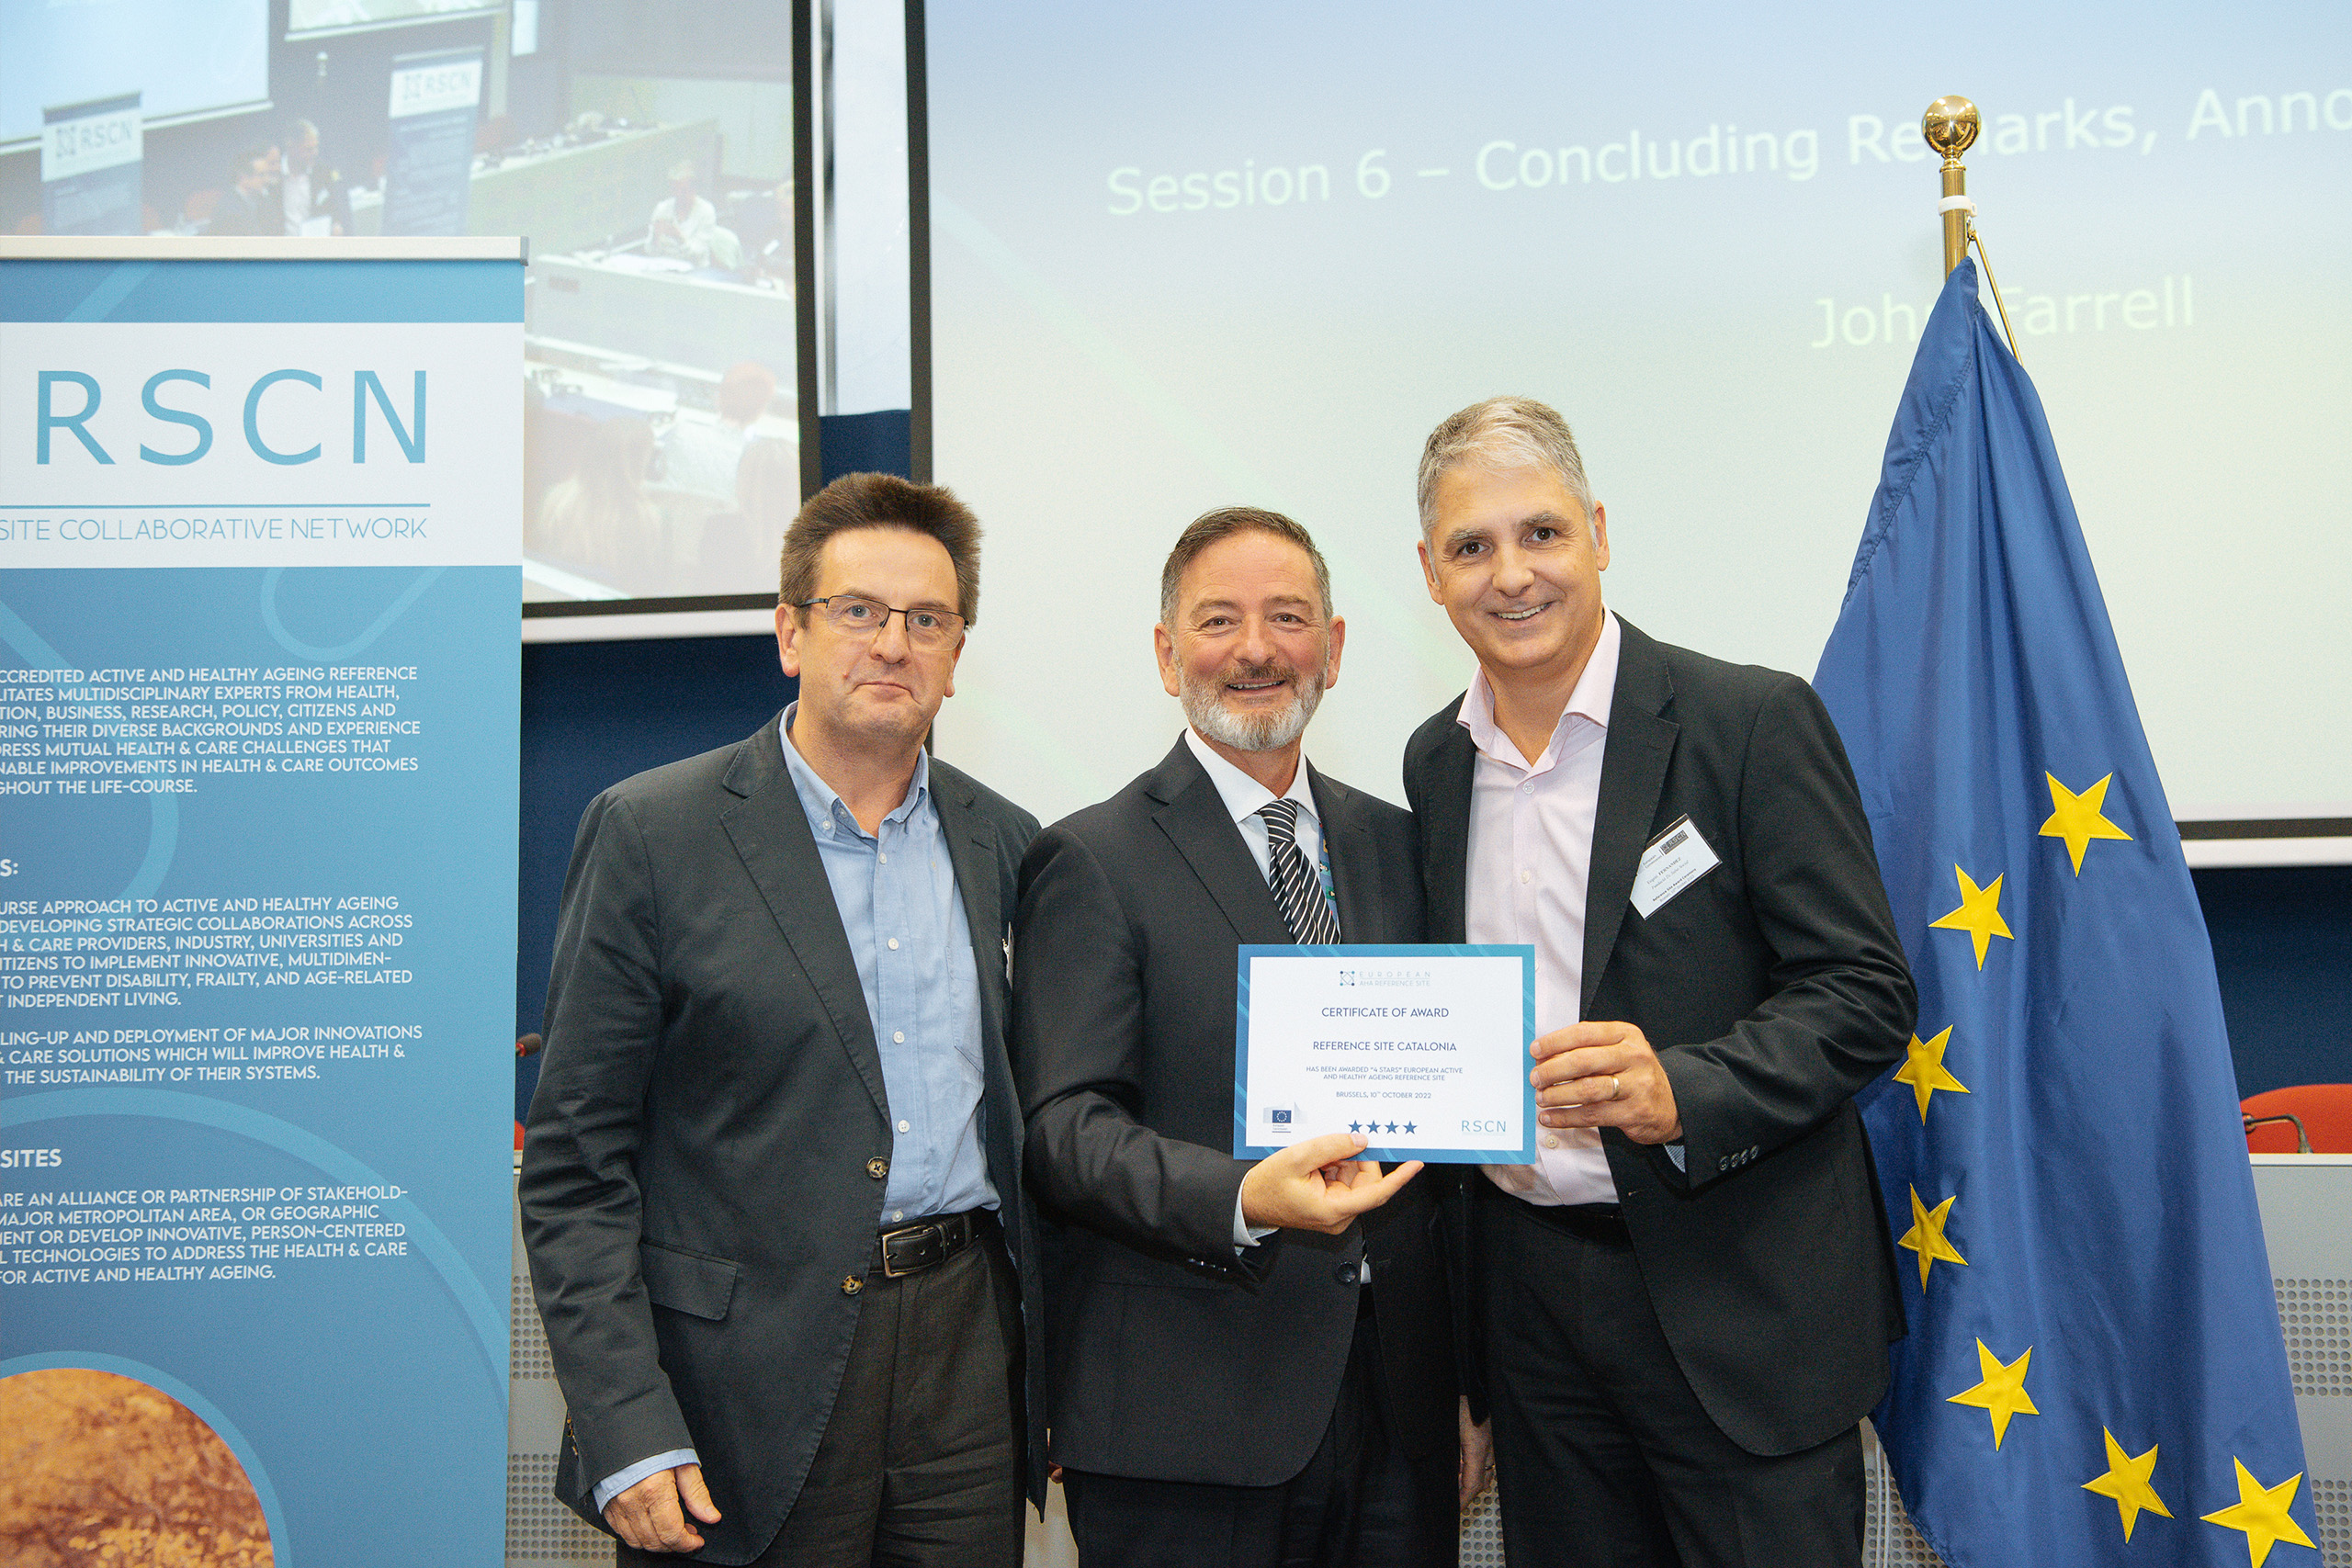 Catalonia is again awarded the European distinction as a region of reference for active and healthy ageing